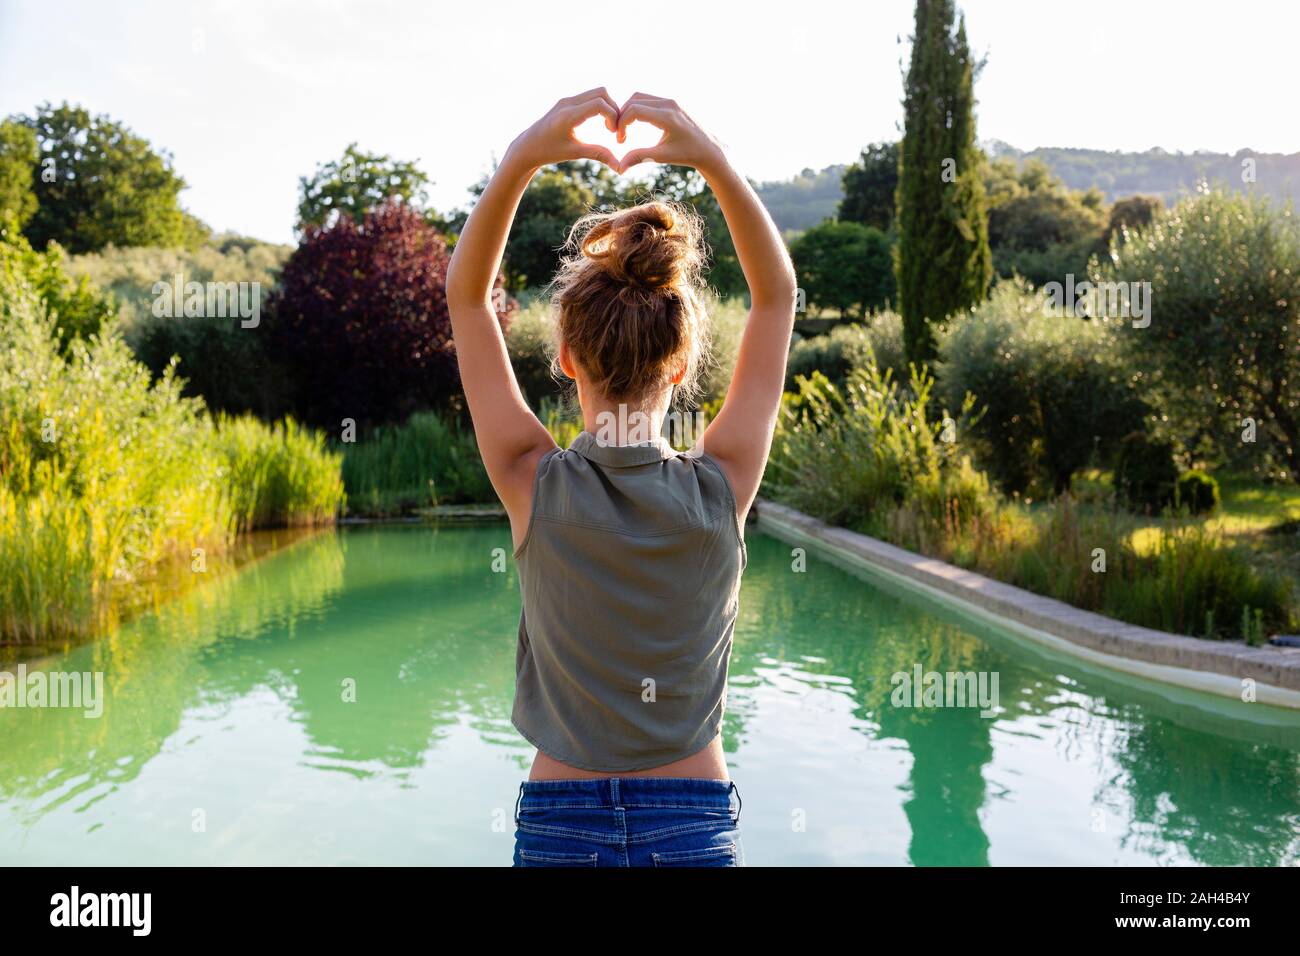 Rear view of a girl standing at swimming pool, forming a heart with her hands Stock Photo